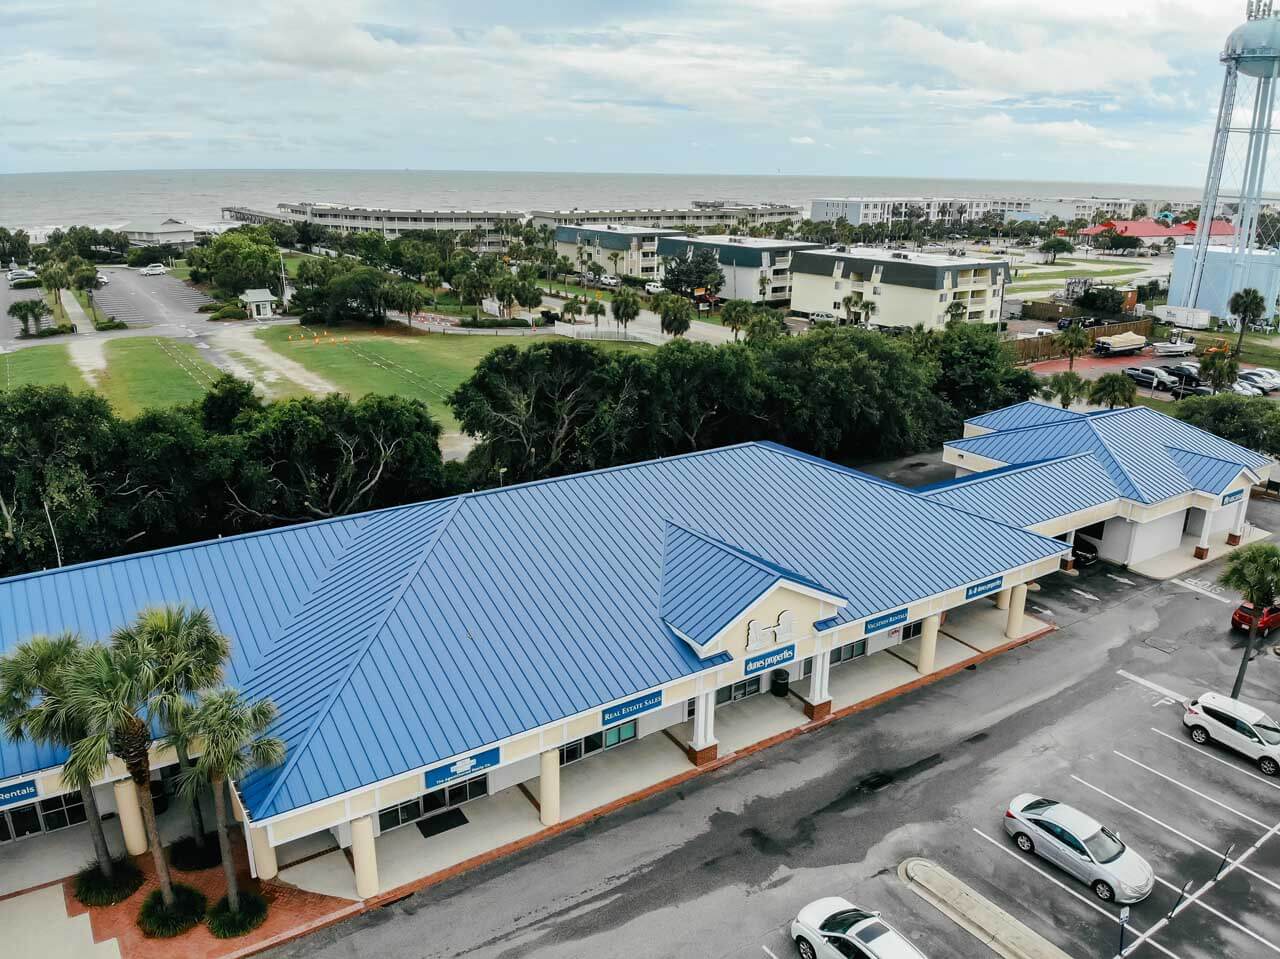 Aerial view of a painted blue metal roof on a shopping center at Isle of Palms beach